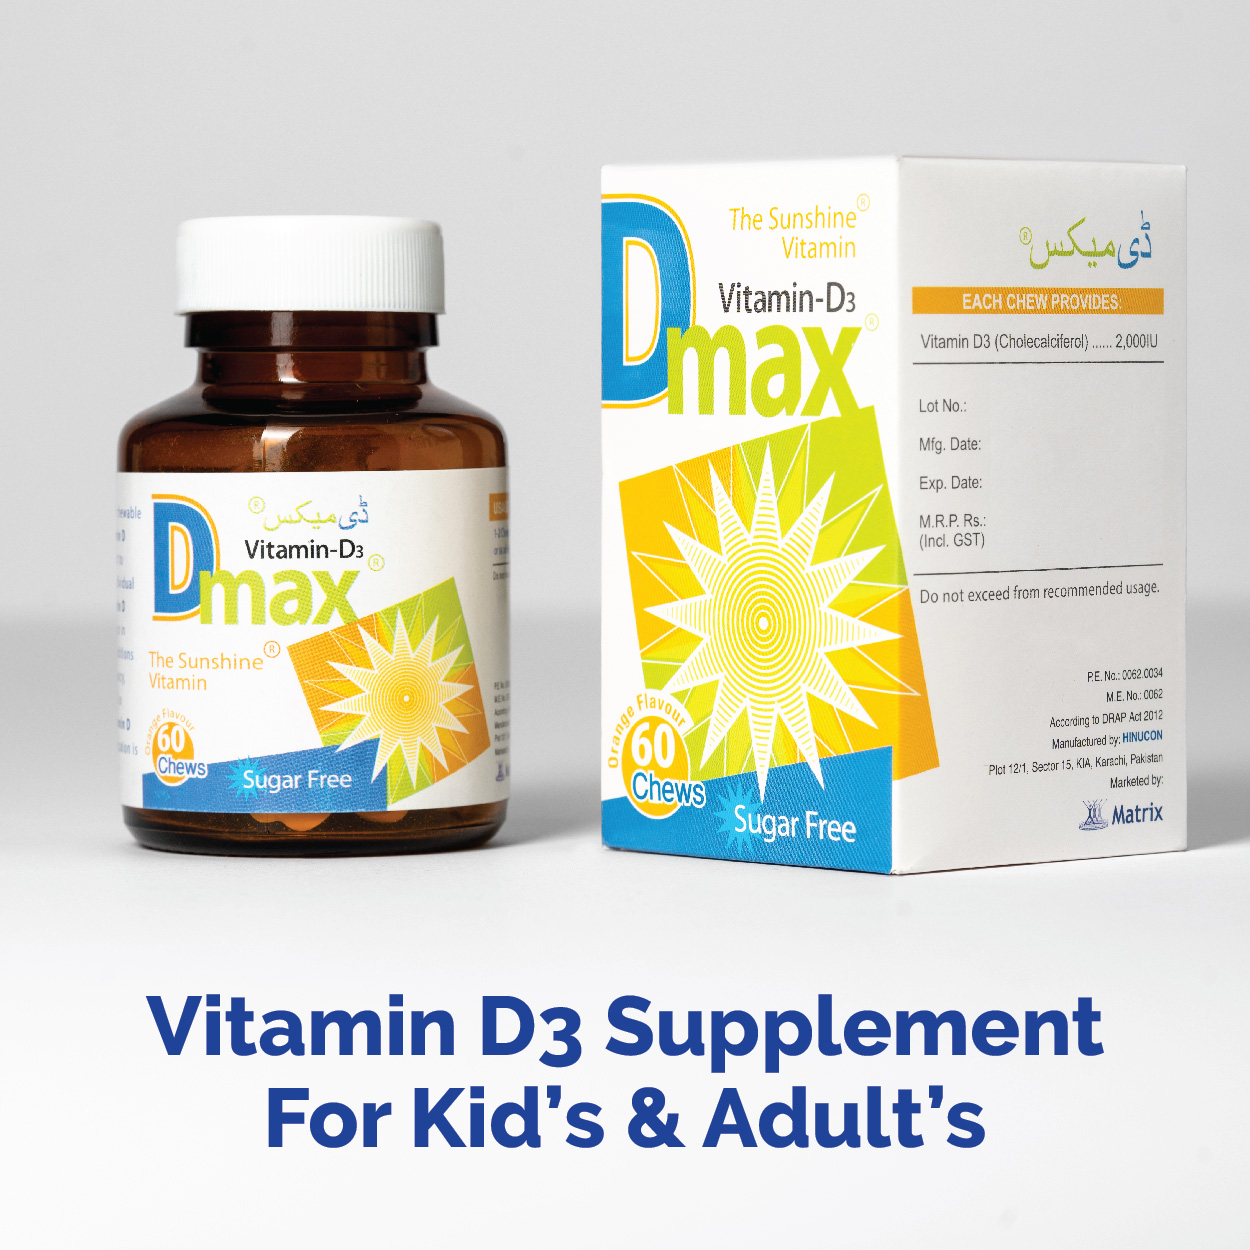 Vitamin D 3 Supplement for Kids & Adults